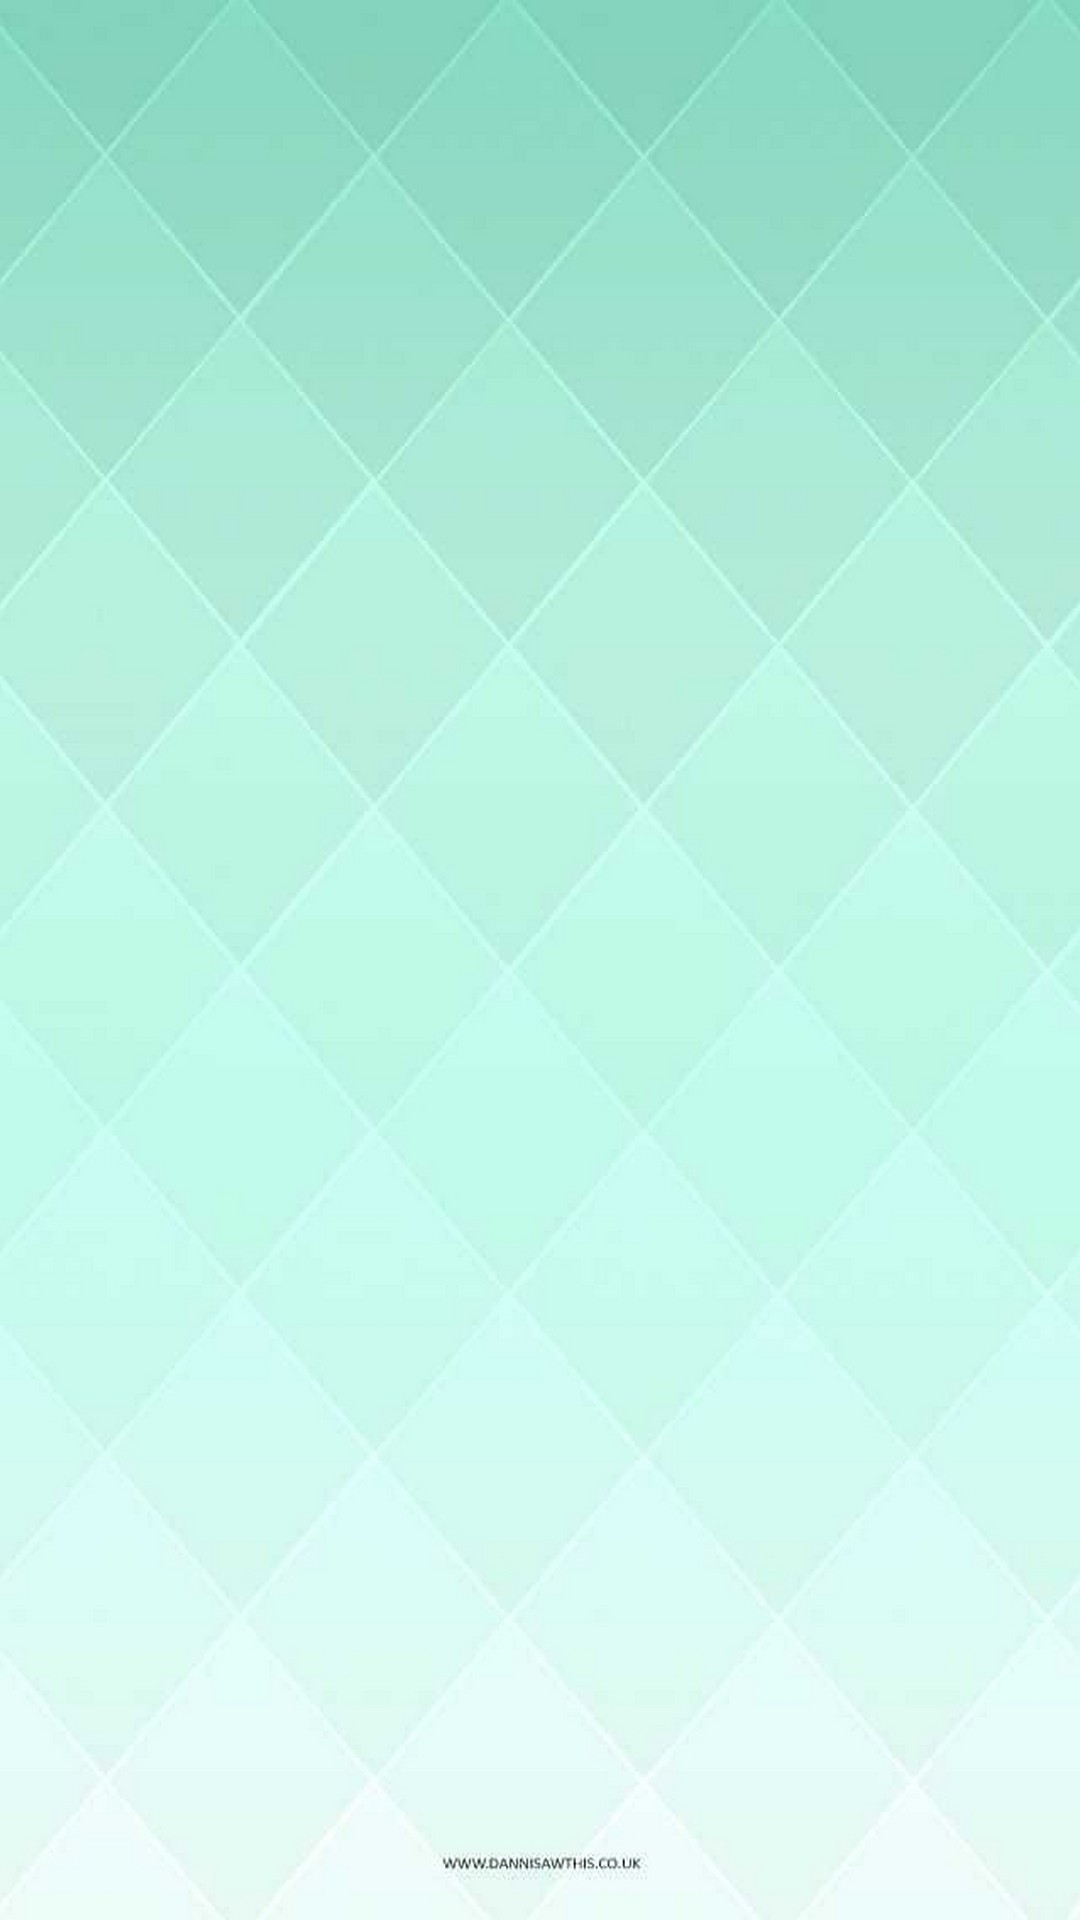 Android Wallpaper Hd Mint Green With Image Resolution - Free Gradient Iphone - HD Wallpaper 